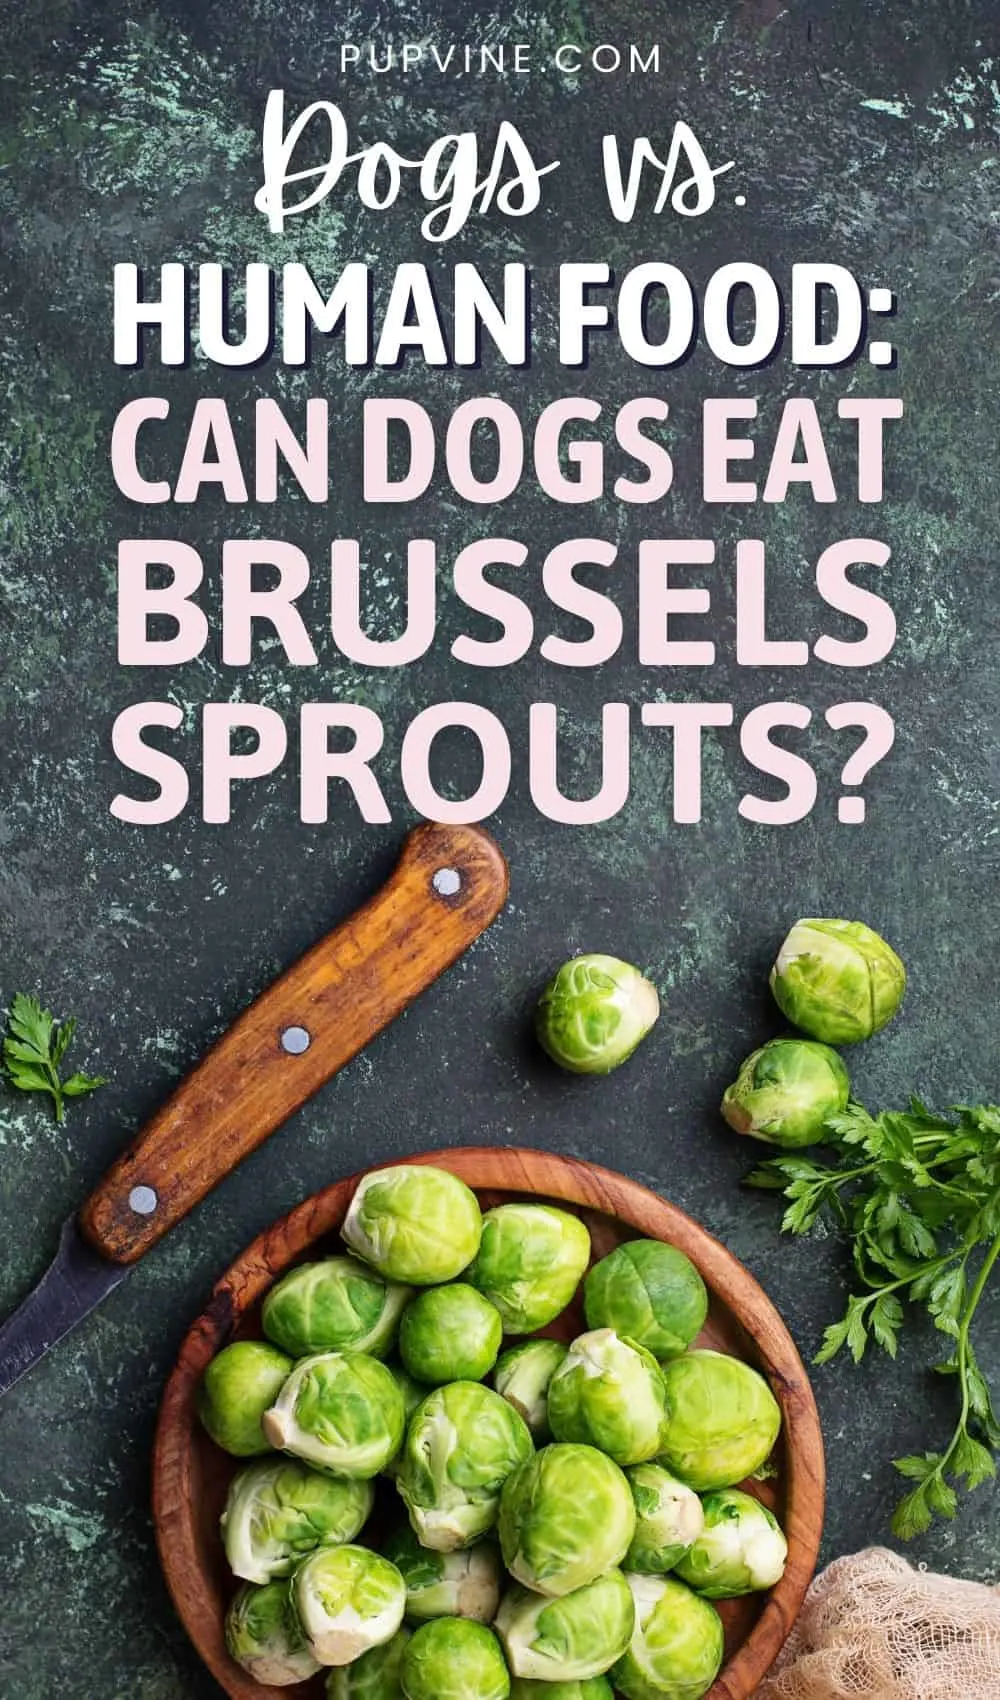 Dogs Vs. Human Food: Can Dogs Eat Brussels Sprouts?